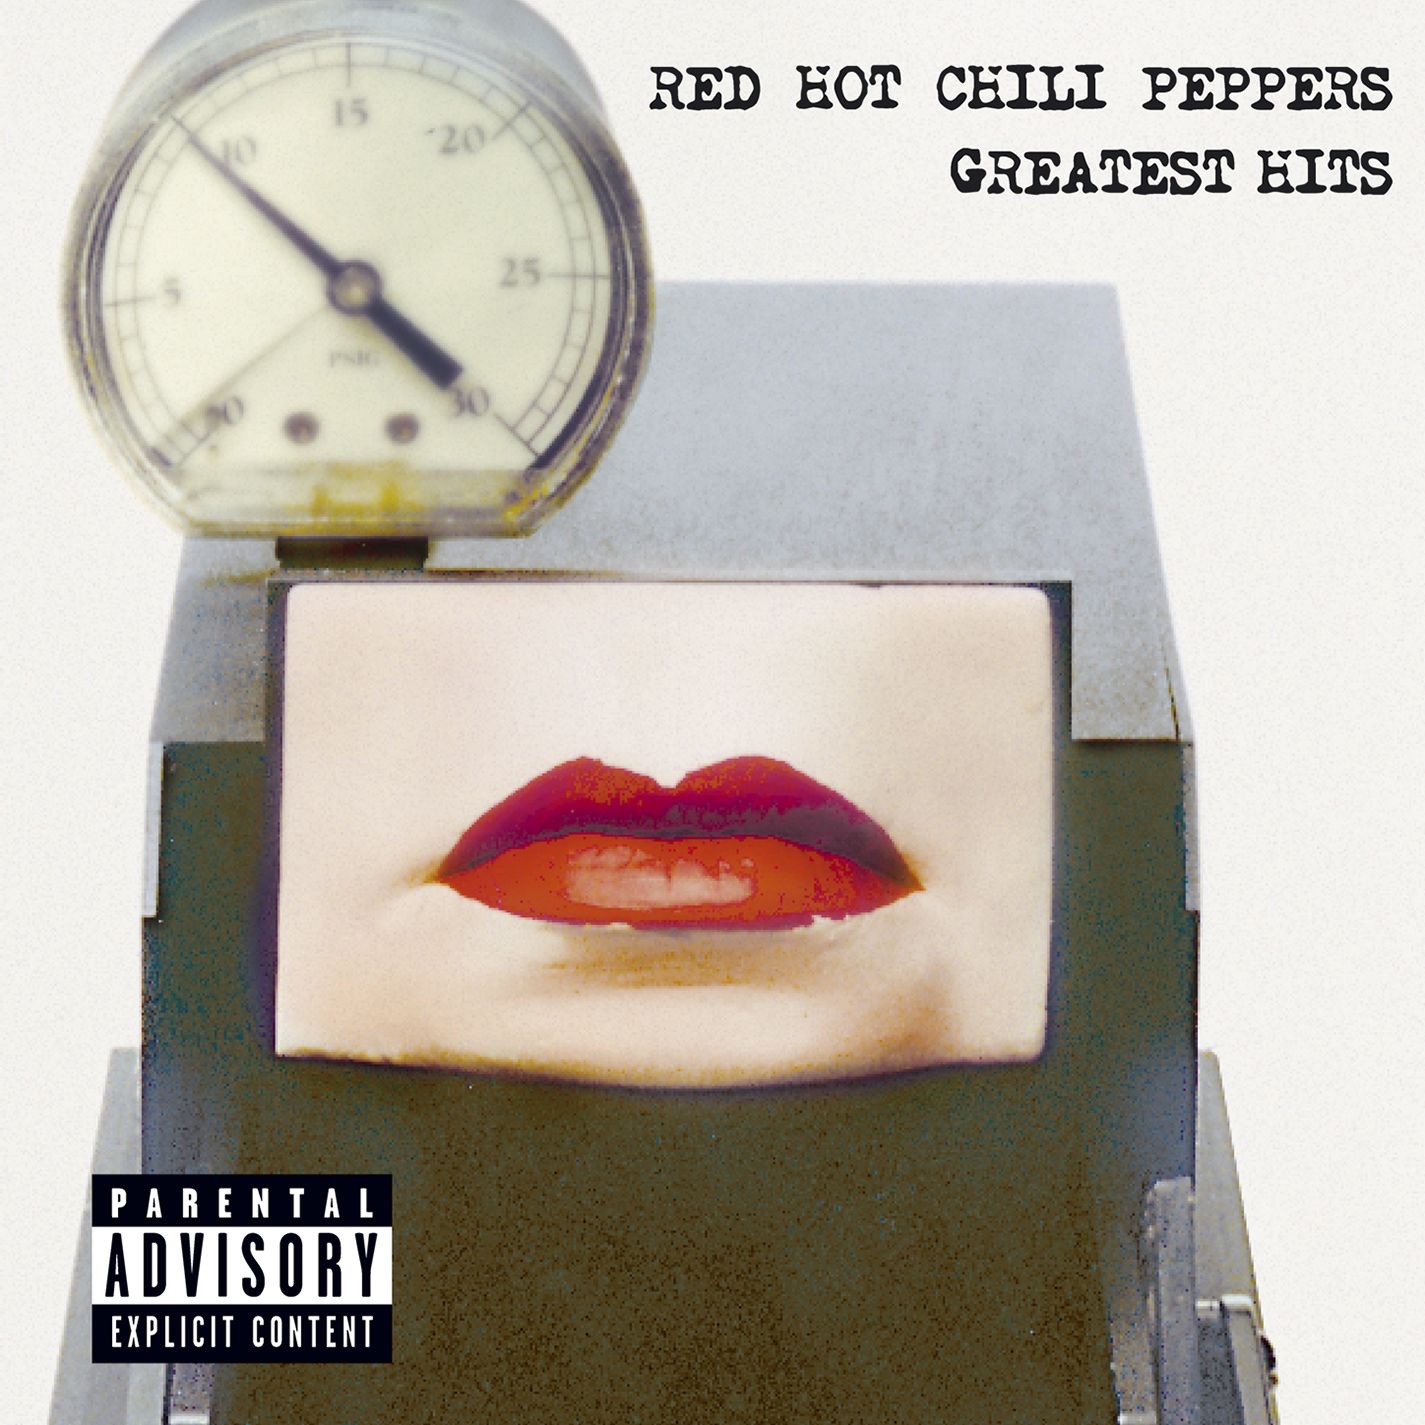 Art for Higher Ground by Red Hot Chili Peppers